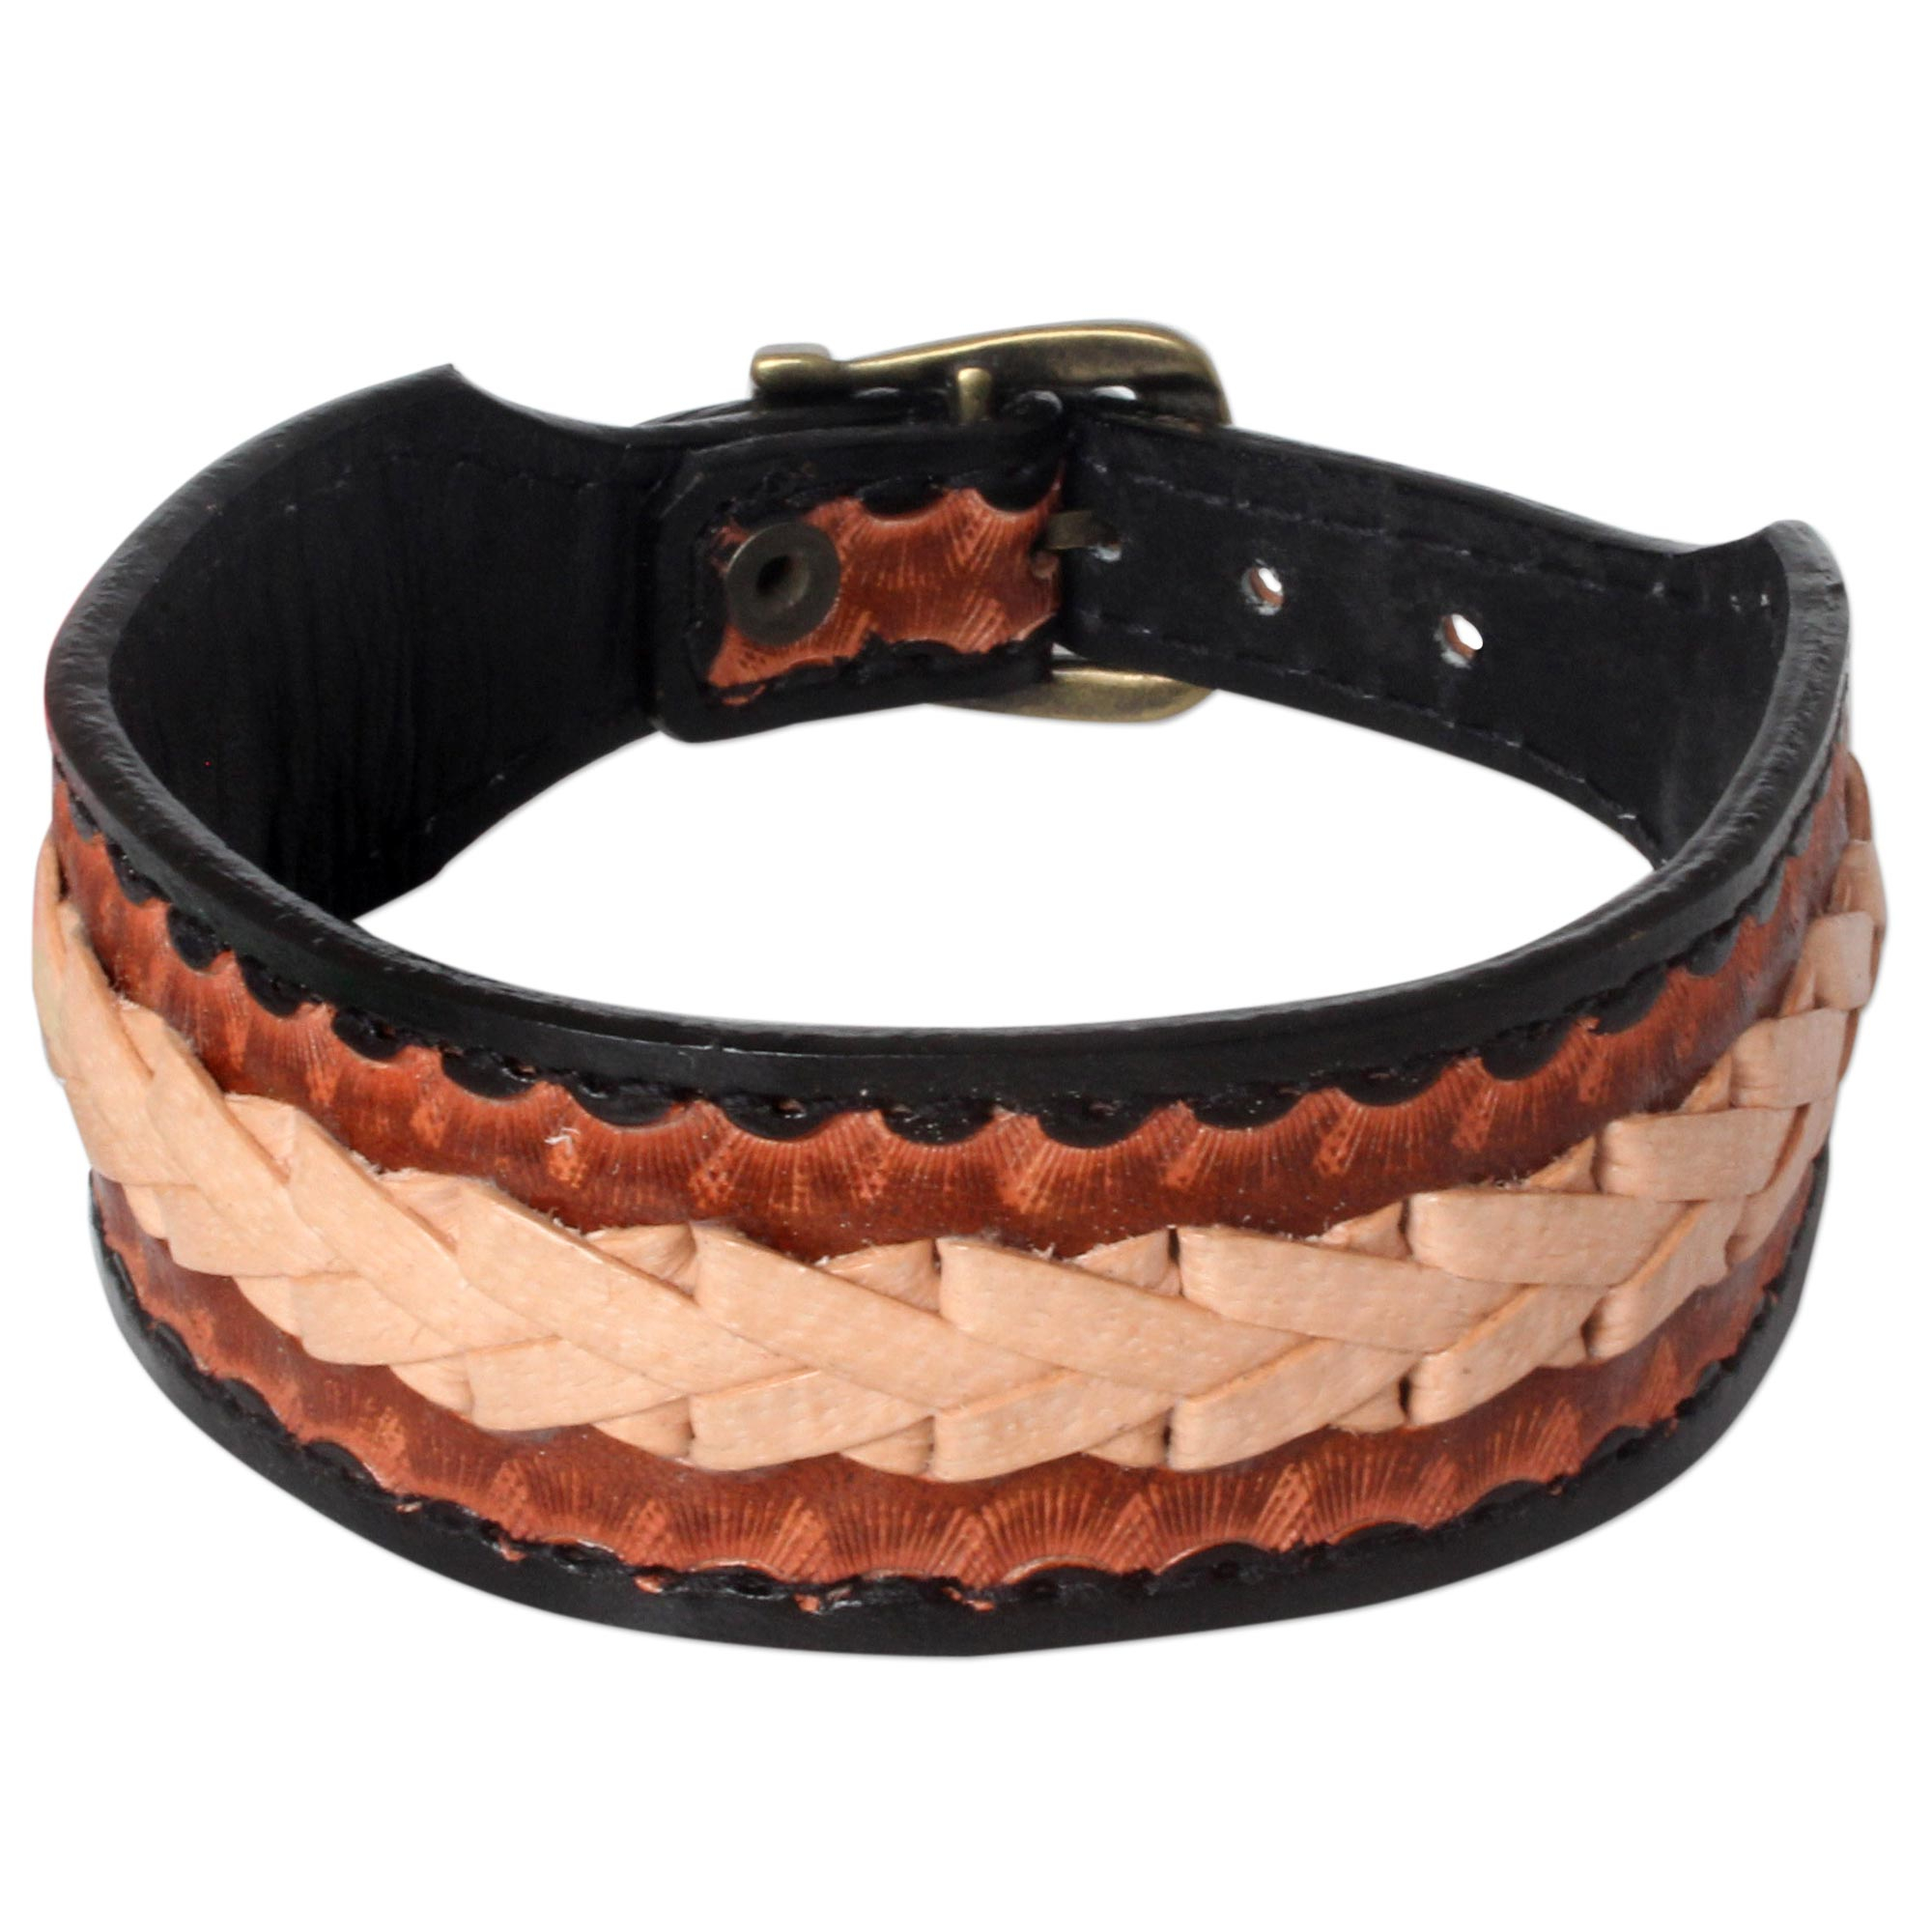 Men's 21.5 Braided Brown and Tan Leather Choker Necklace